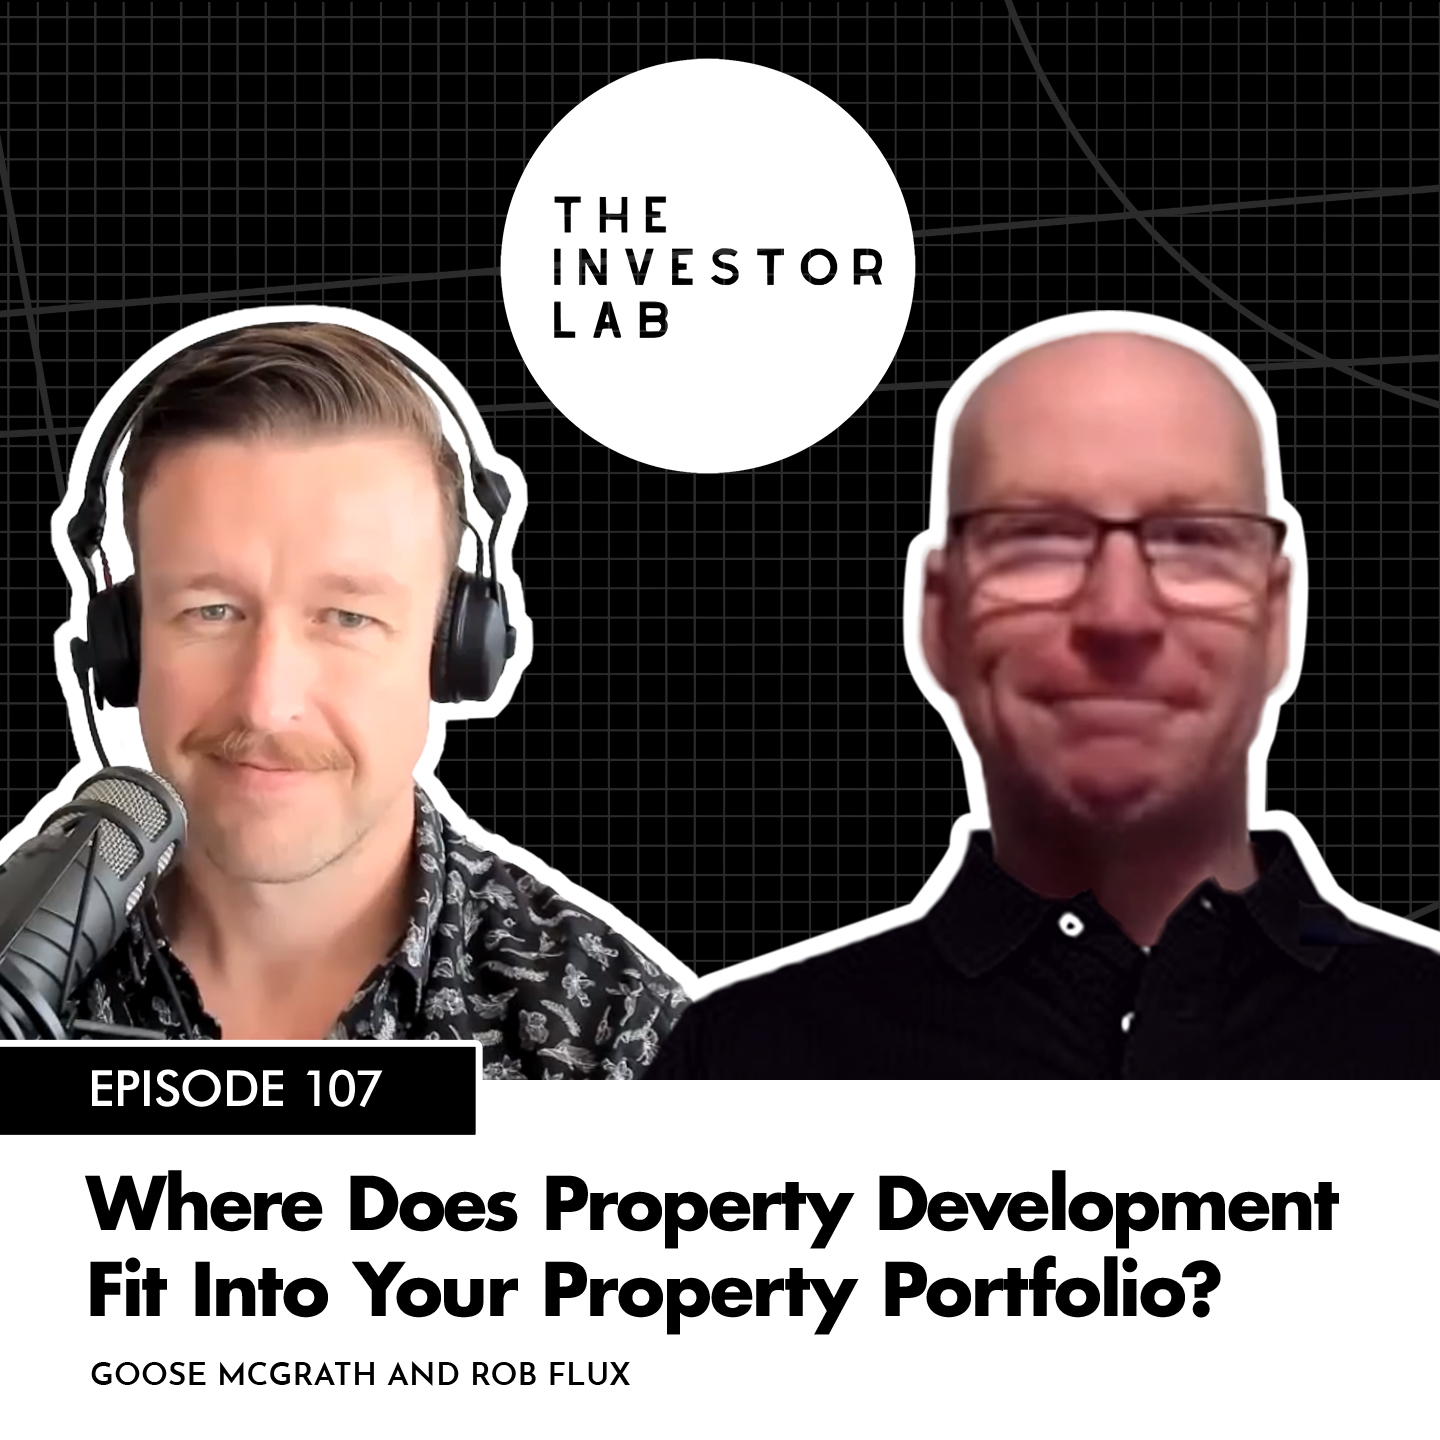 Where Does Property Development Fit Into Your Property Portfolio? (Feat. Rob Flux)